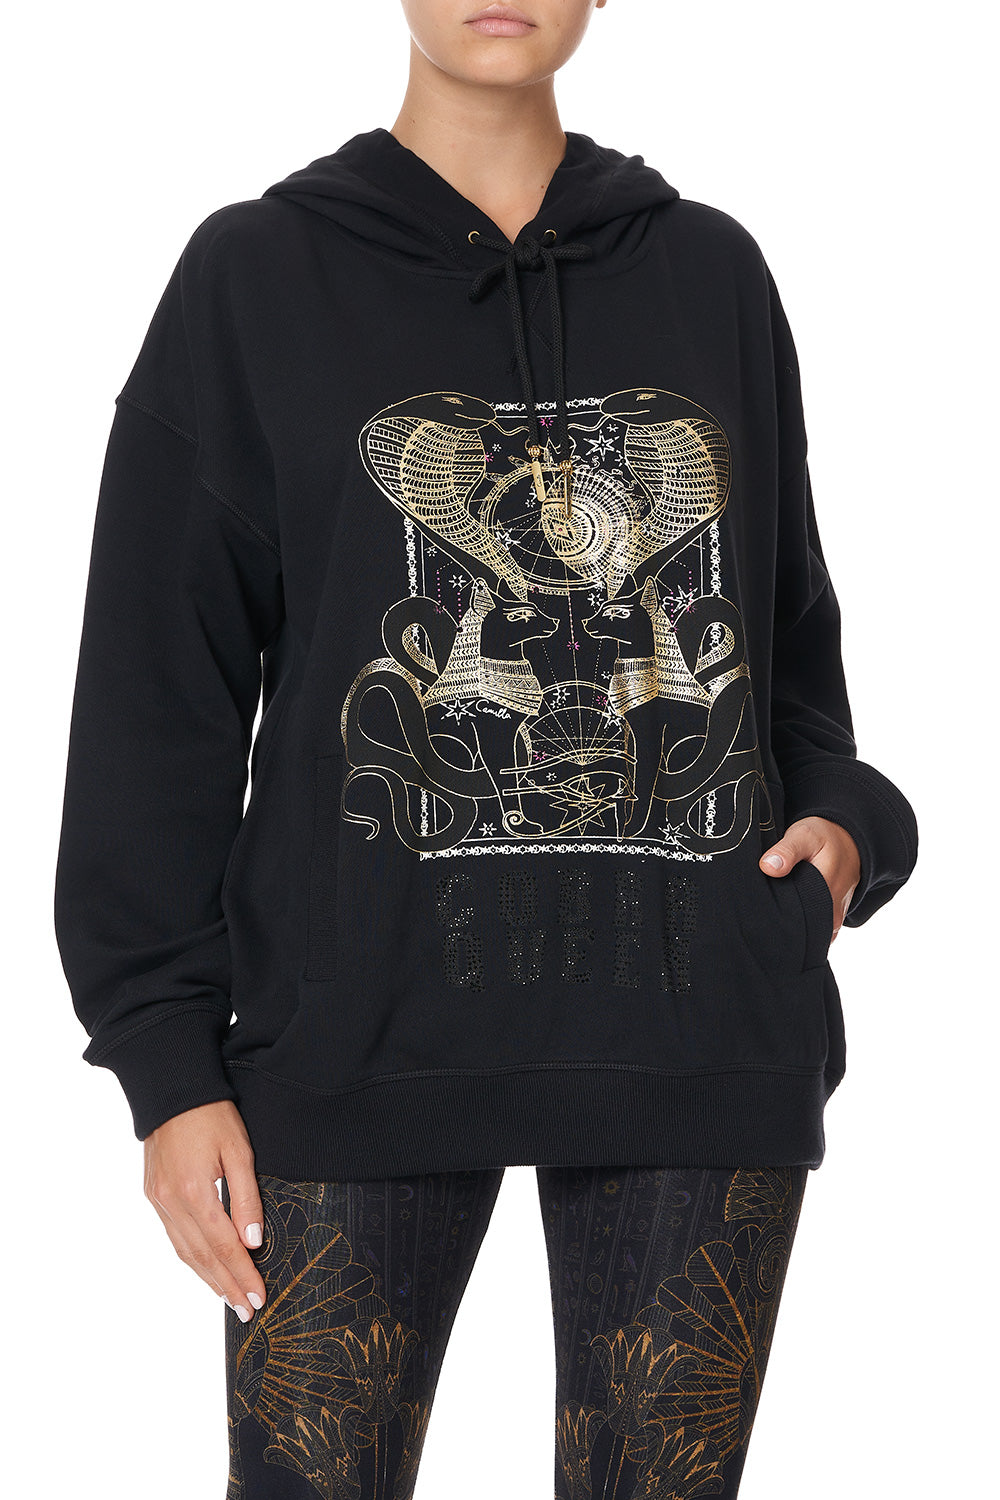 HOODIE WITH SIDE POCKETS COBRA KING